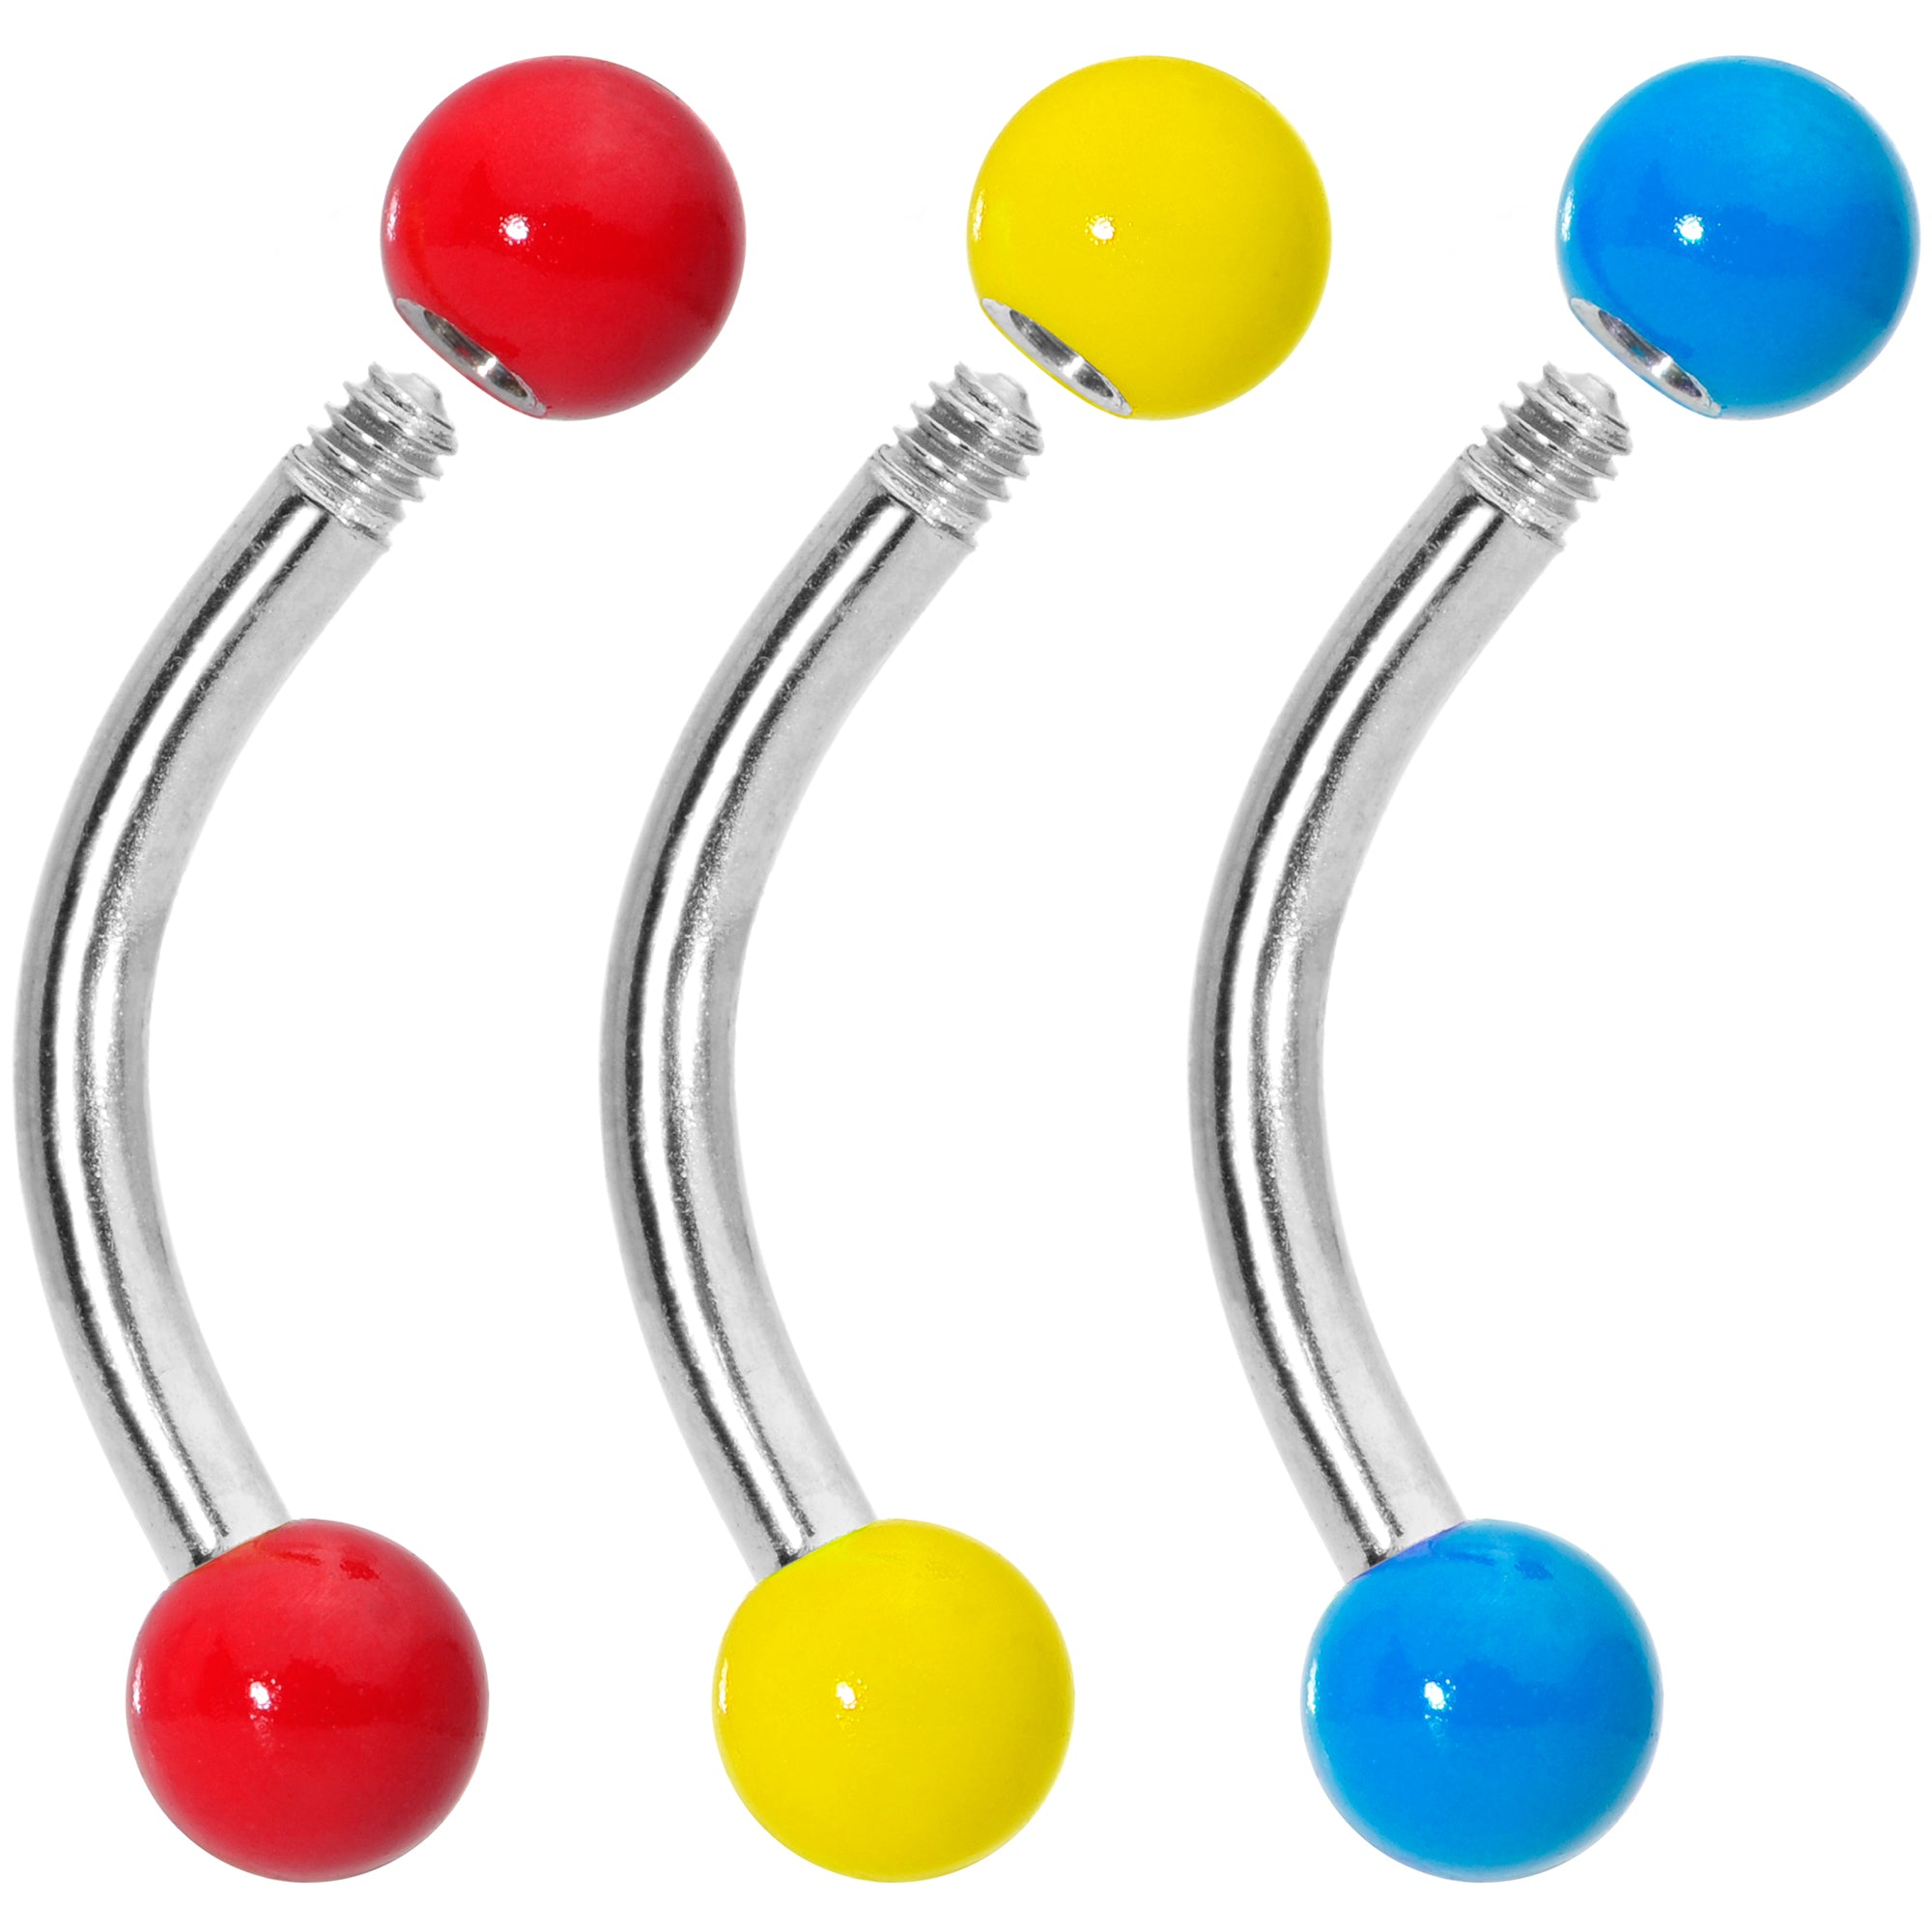 16 Gauge 5/16 Red Yellow Blue Glow in the Dark Curved Barbell Set of 3